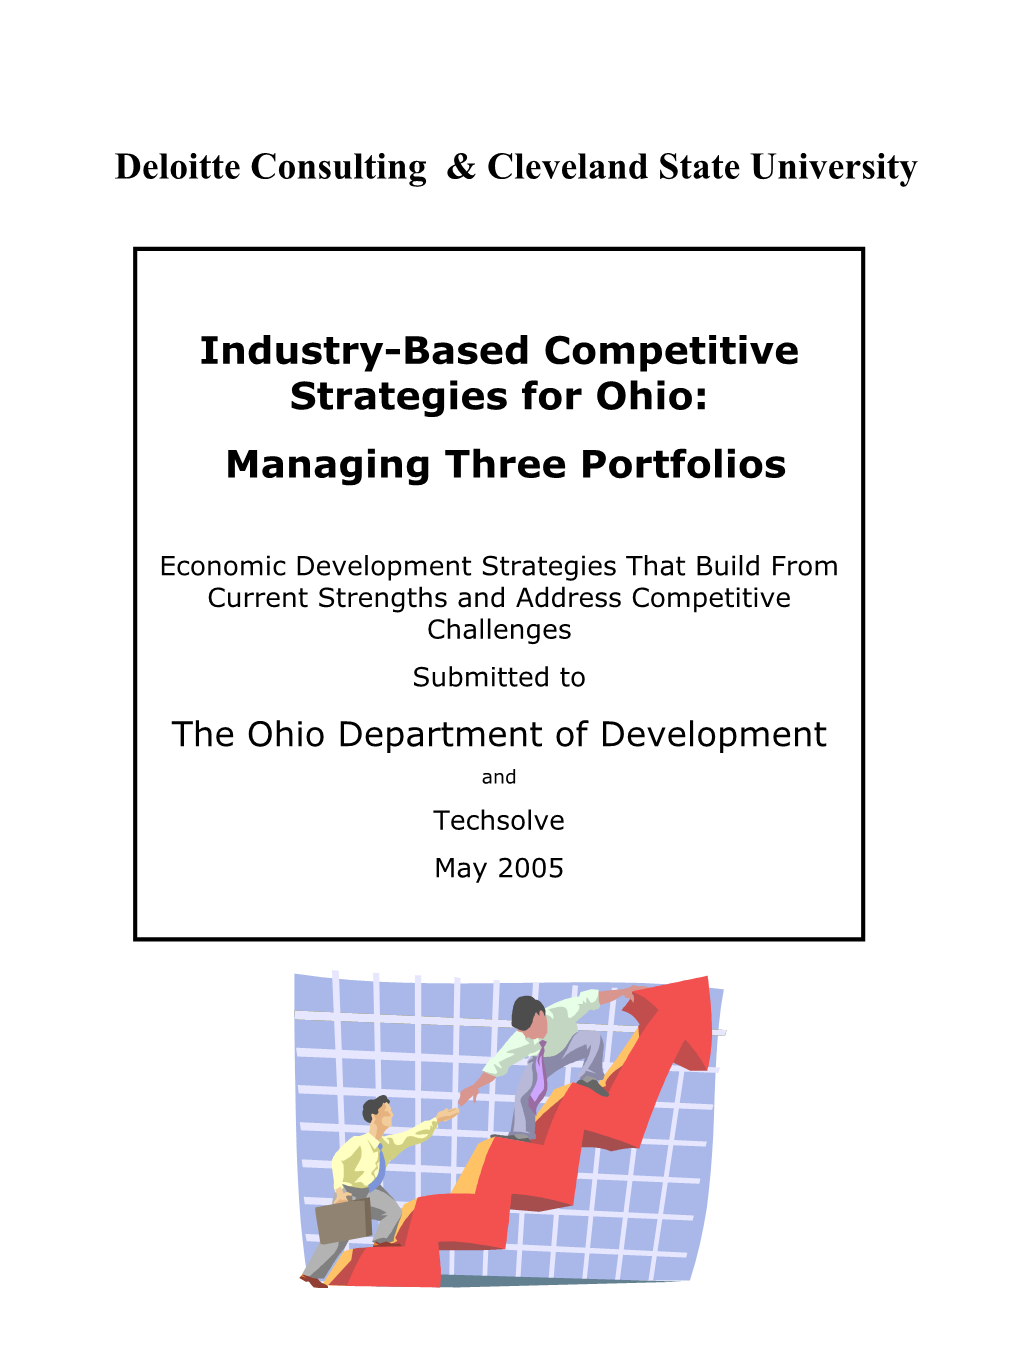 Deloitte Consulting & Cleveland State University Industry-Based Competitive Strategies for Ohio: Managing Three Portfolios